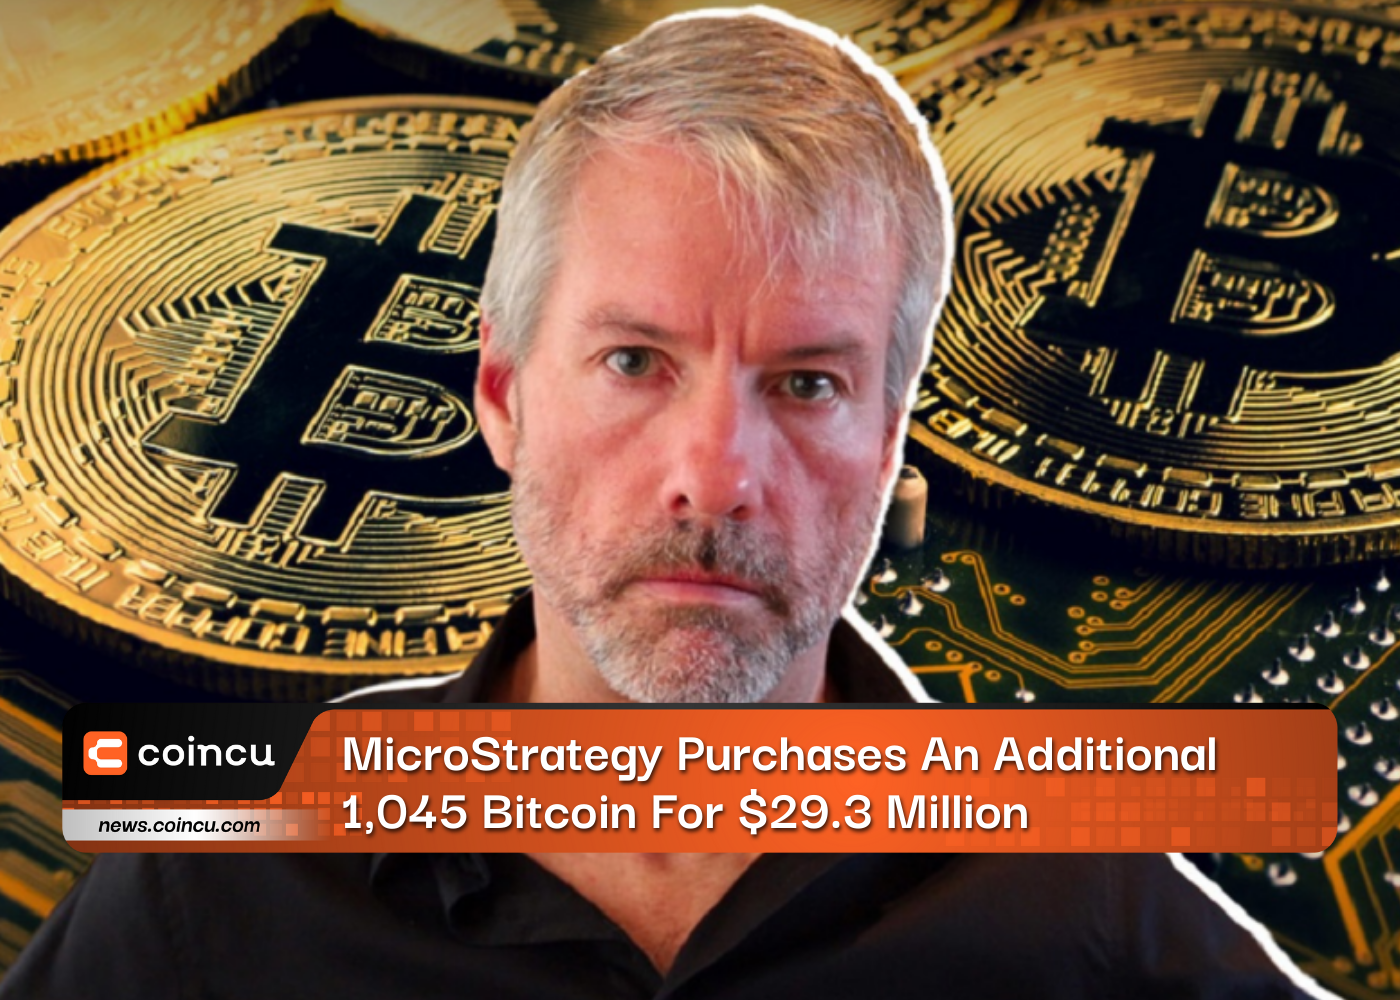 MicroStrategy Purchases An Additional 1,045 Bitcoin For $29.3 Million